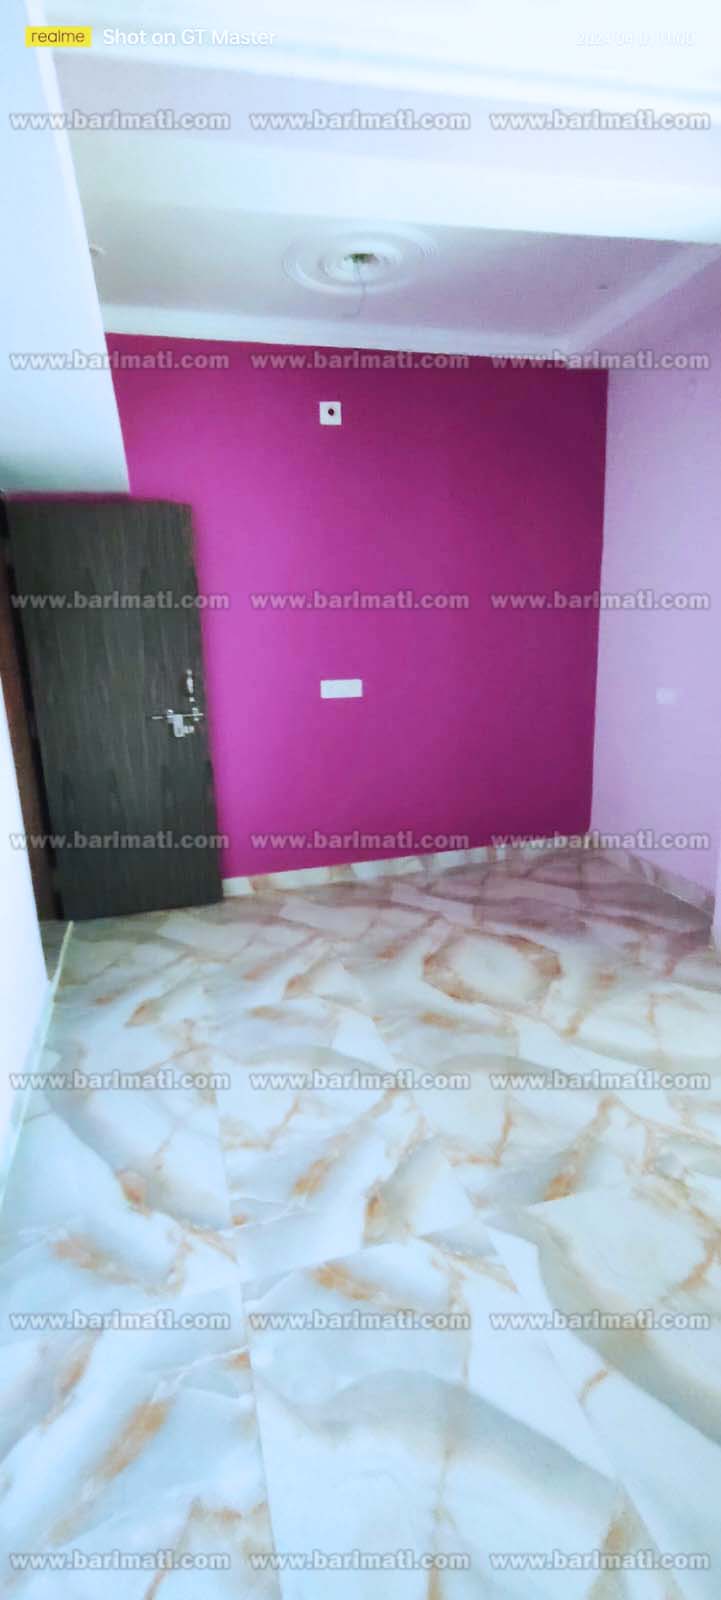 Inviting 2-bedroom residence in Anisabad, Harnichak, Patna, available for rent at Rs 7000 per month